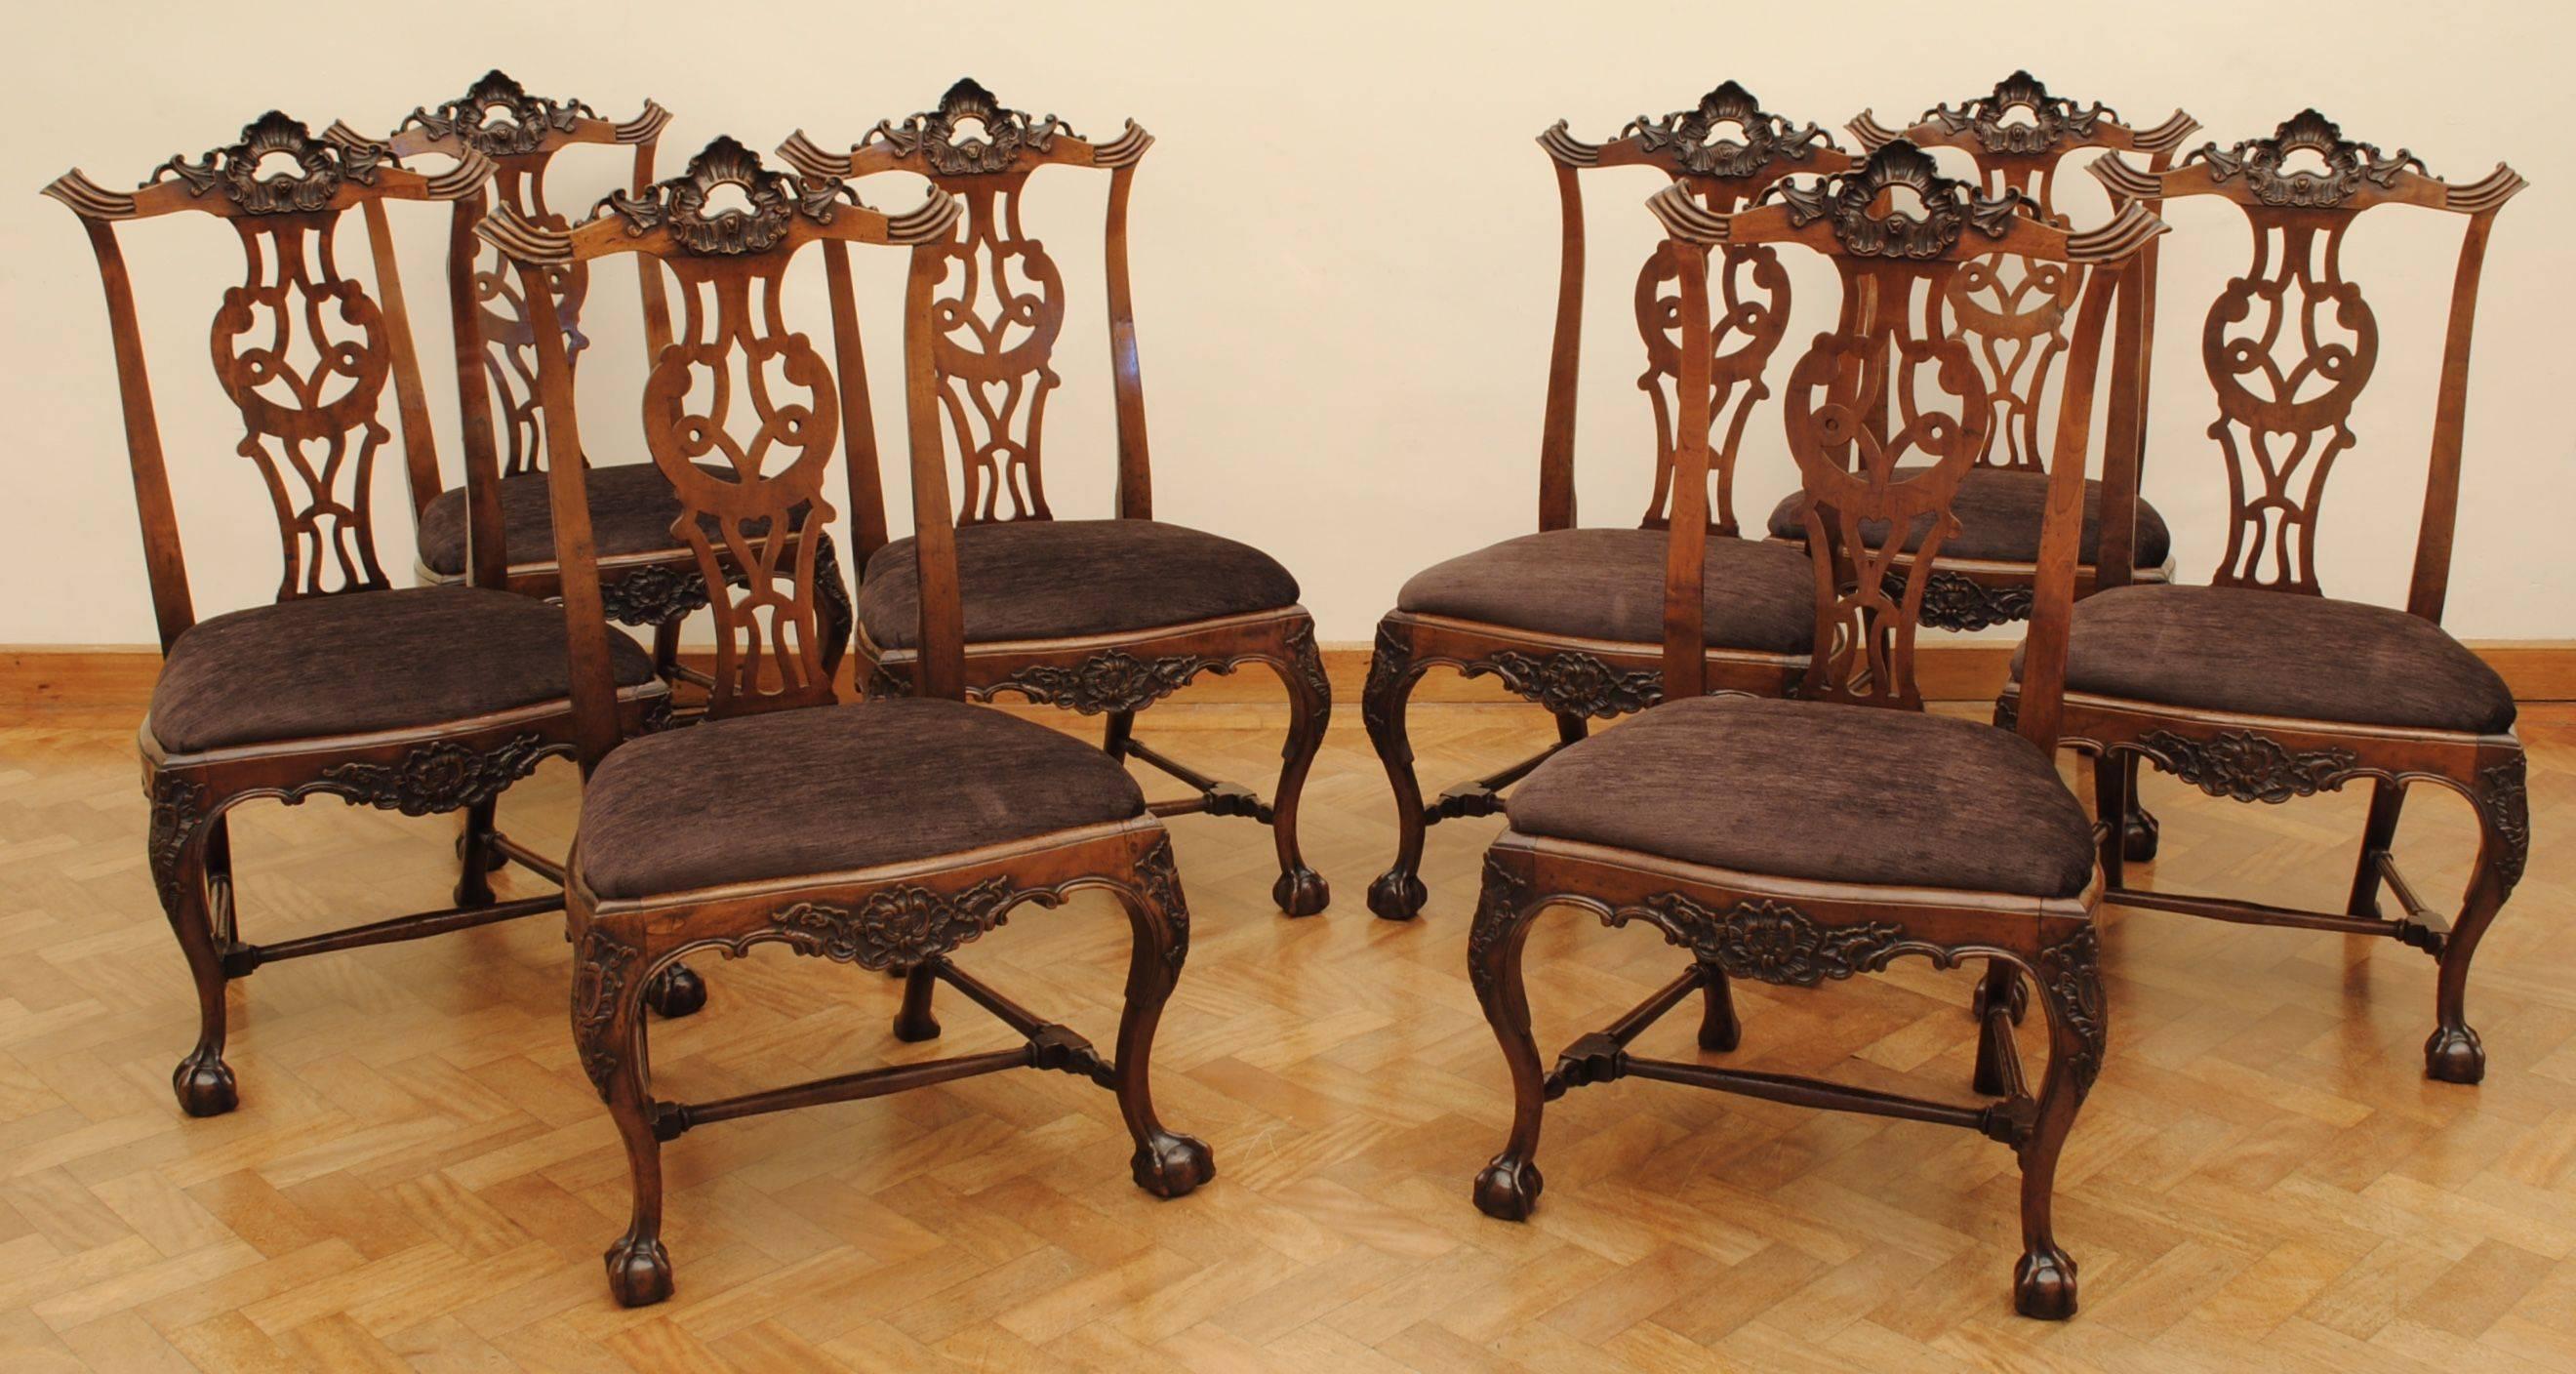 Late 18th Century Set of Eight Portuguese Walnut Chippendale Influenced 18th Century Chairs